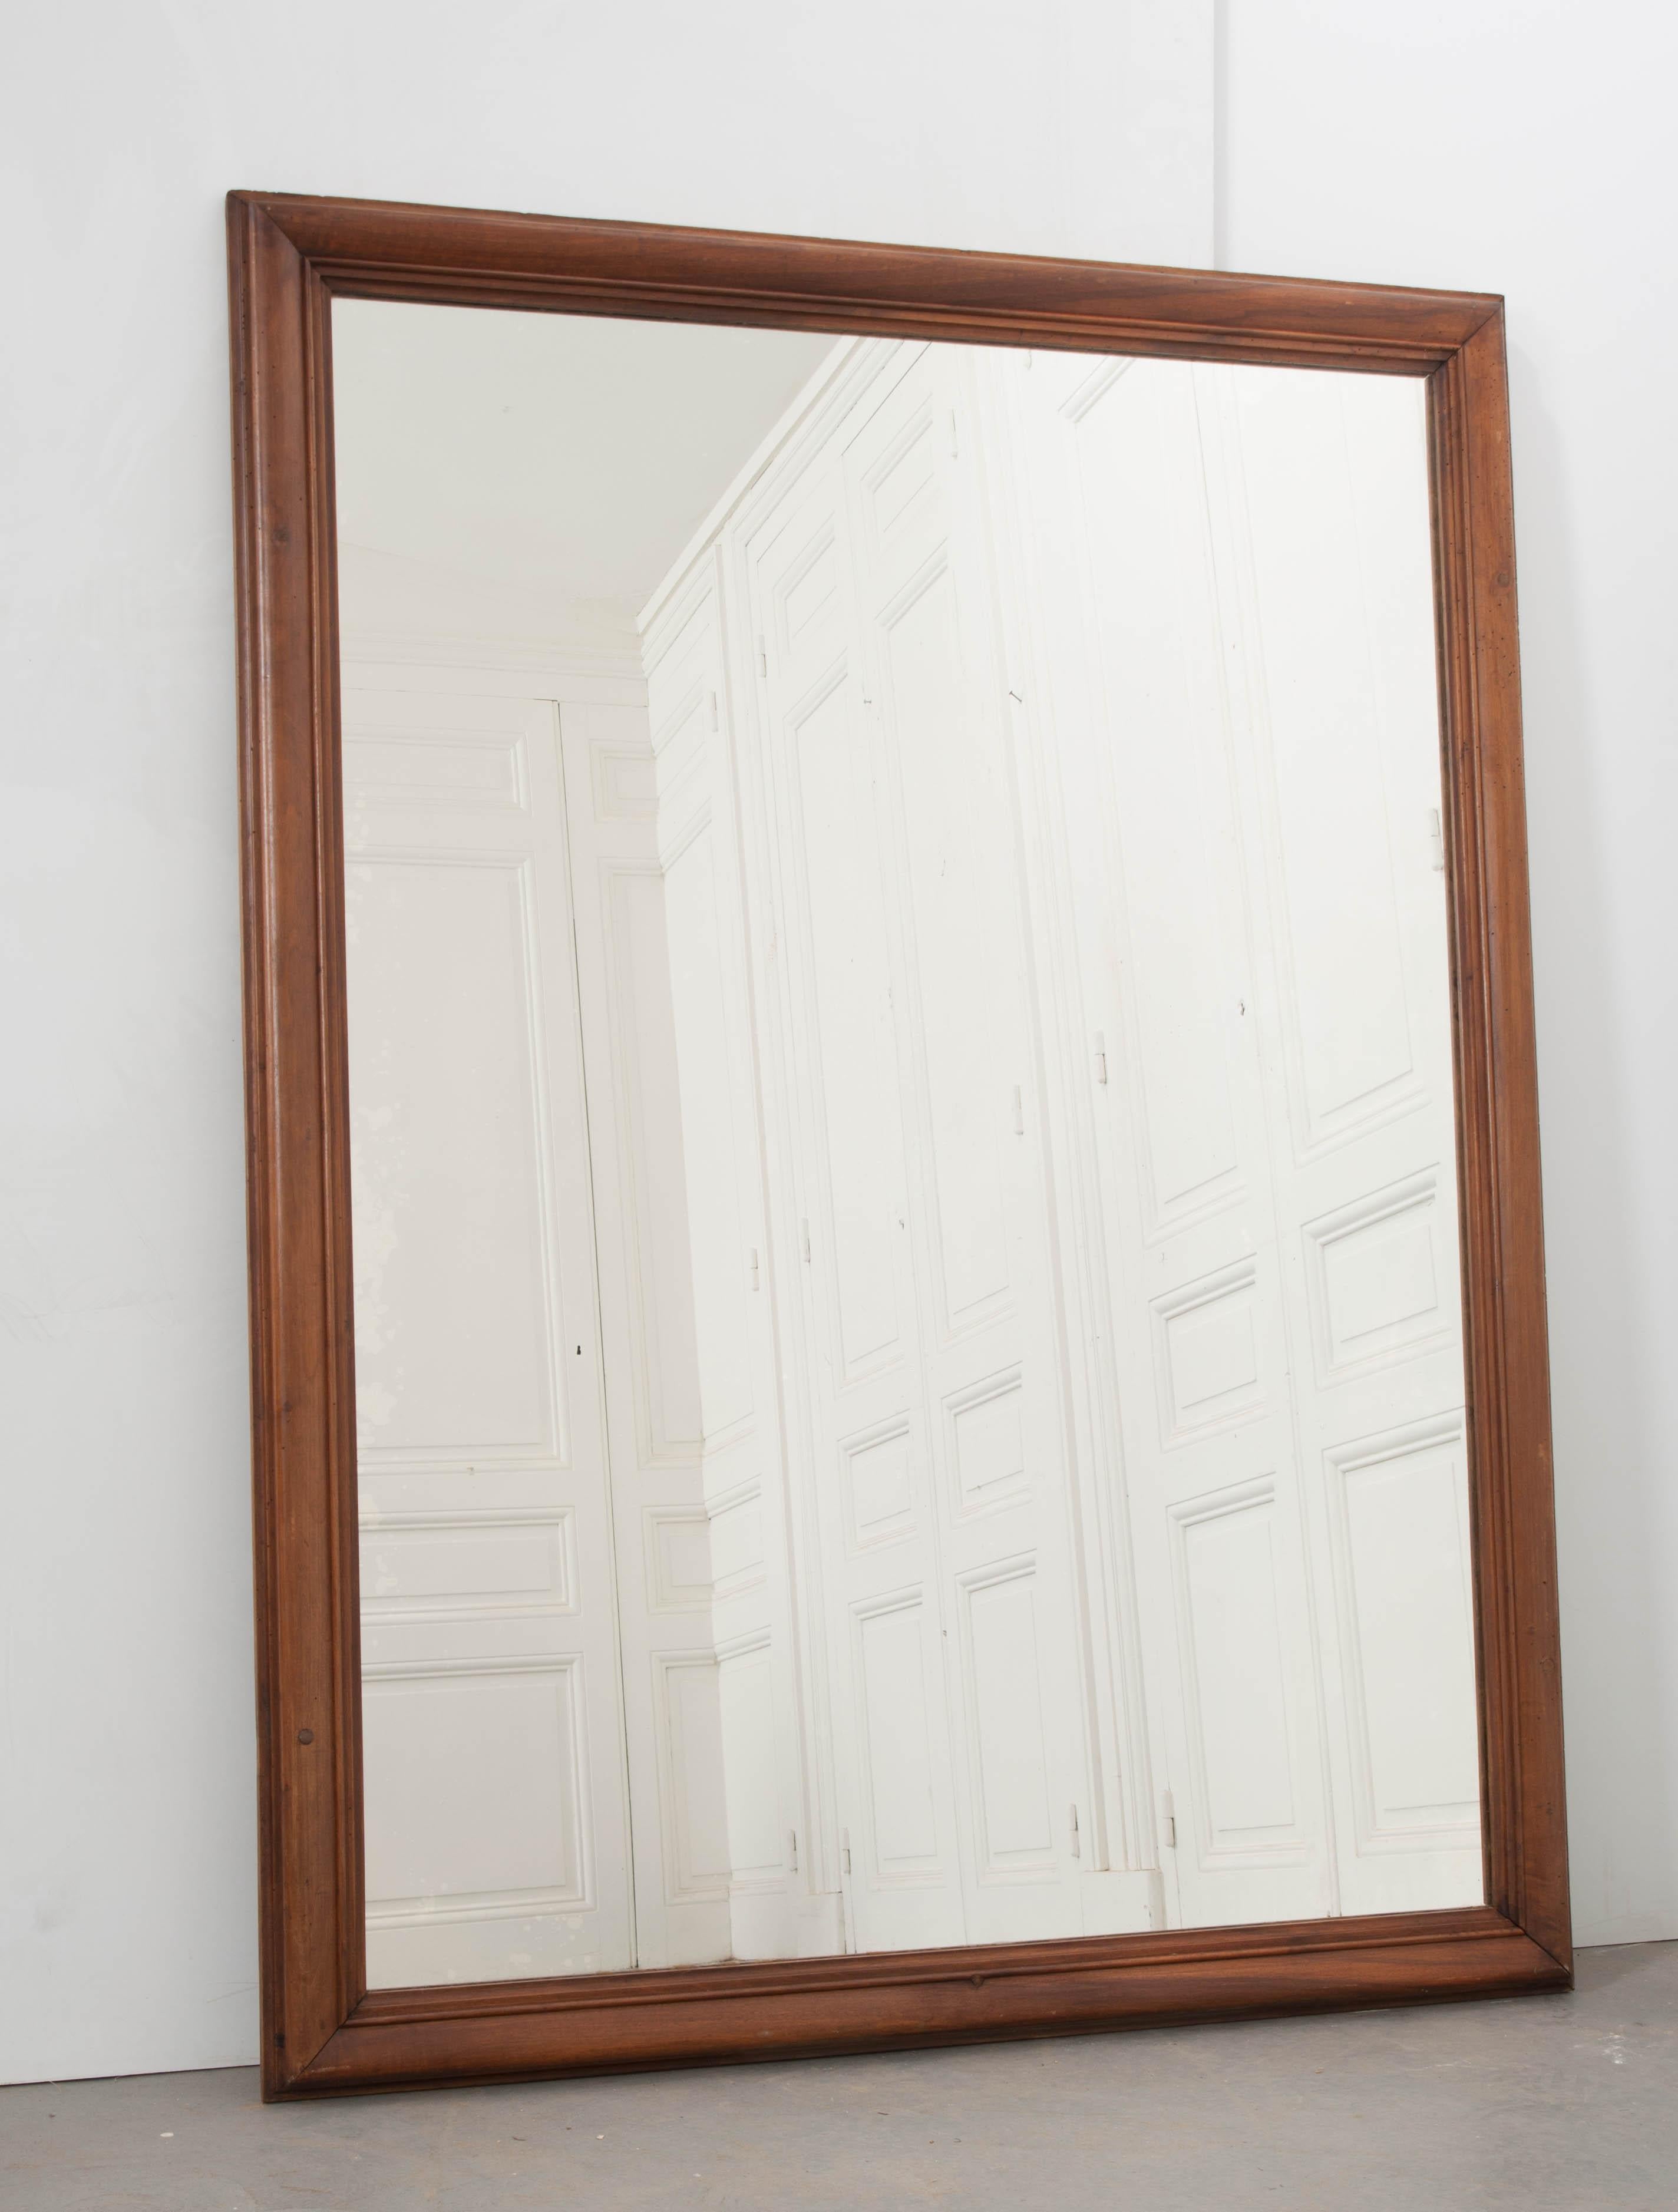 A large carved walnut mirror from France, circa 1890-1900. Uncomplicated yet substantial and attractive, this mirror retains its original glass and is sure to add provincial charm to any room you choose to place it.